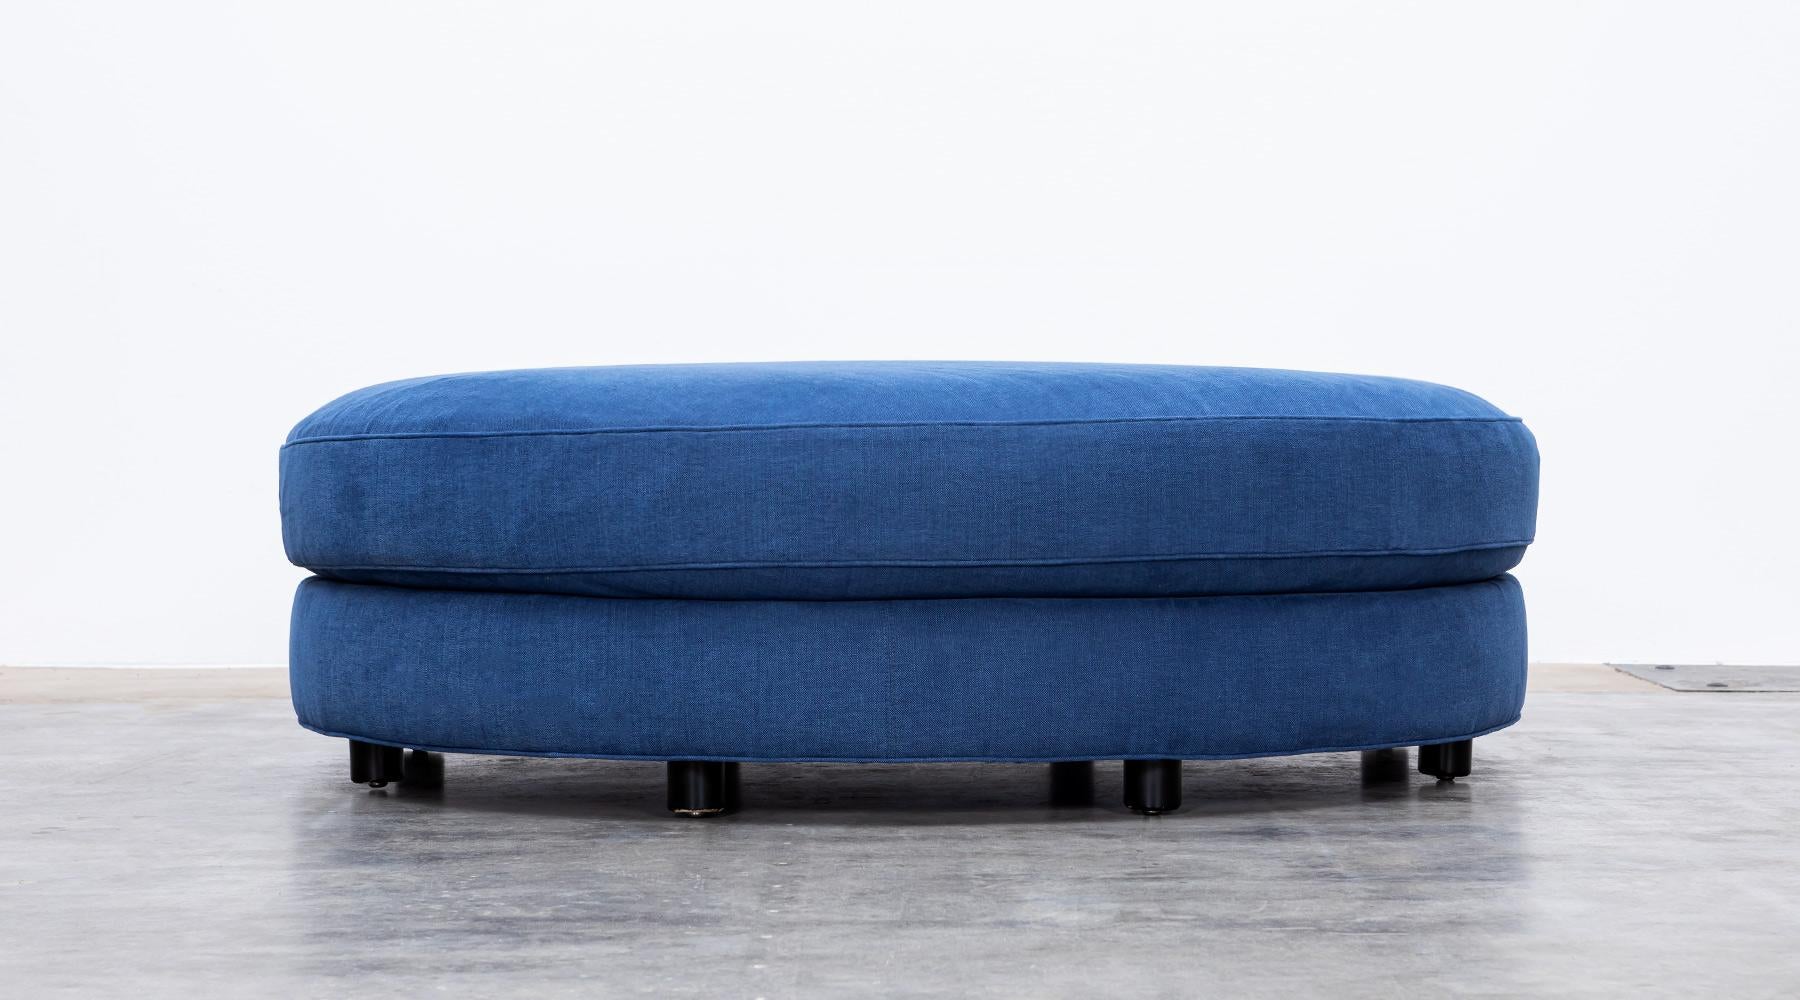 Ottoman or pouf, new upholstery by Milo Baughman, USA, 1970.

Inviting Ottoman by American modernist Milo Baughman. Its wide and organic shape is matched with a high-quality new upholstery in a wonderful hue. Manufactured by Thayer Coggin.